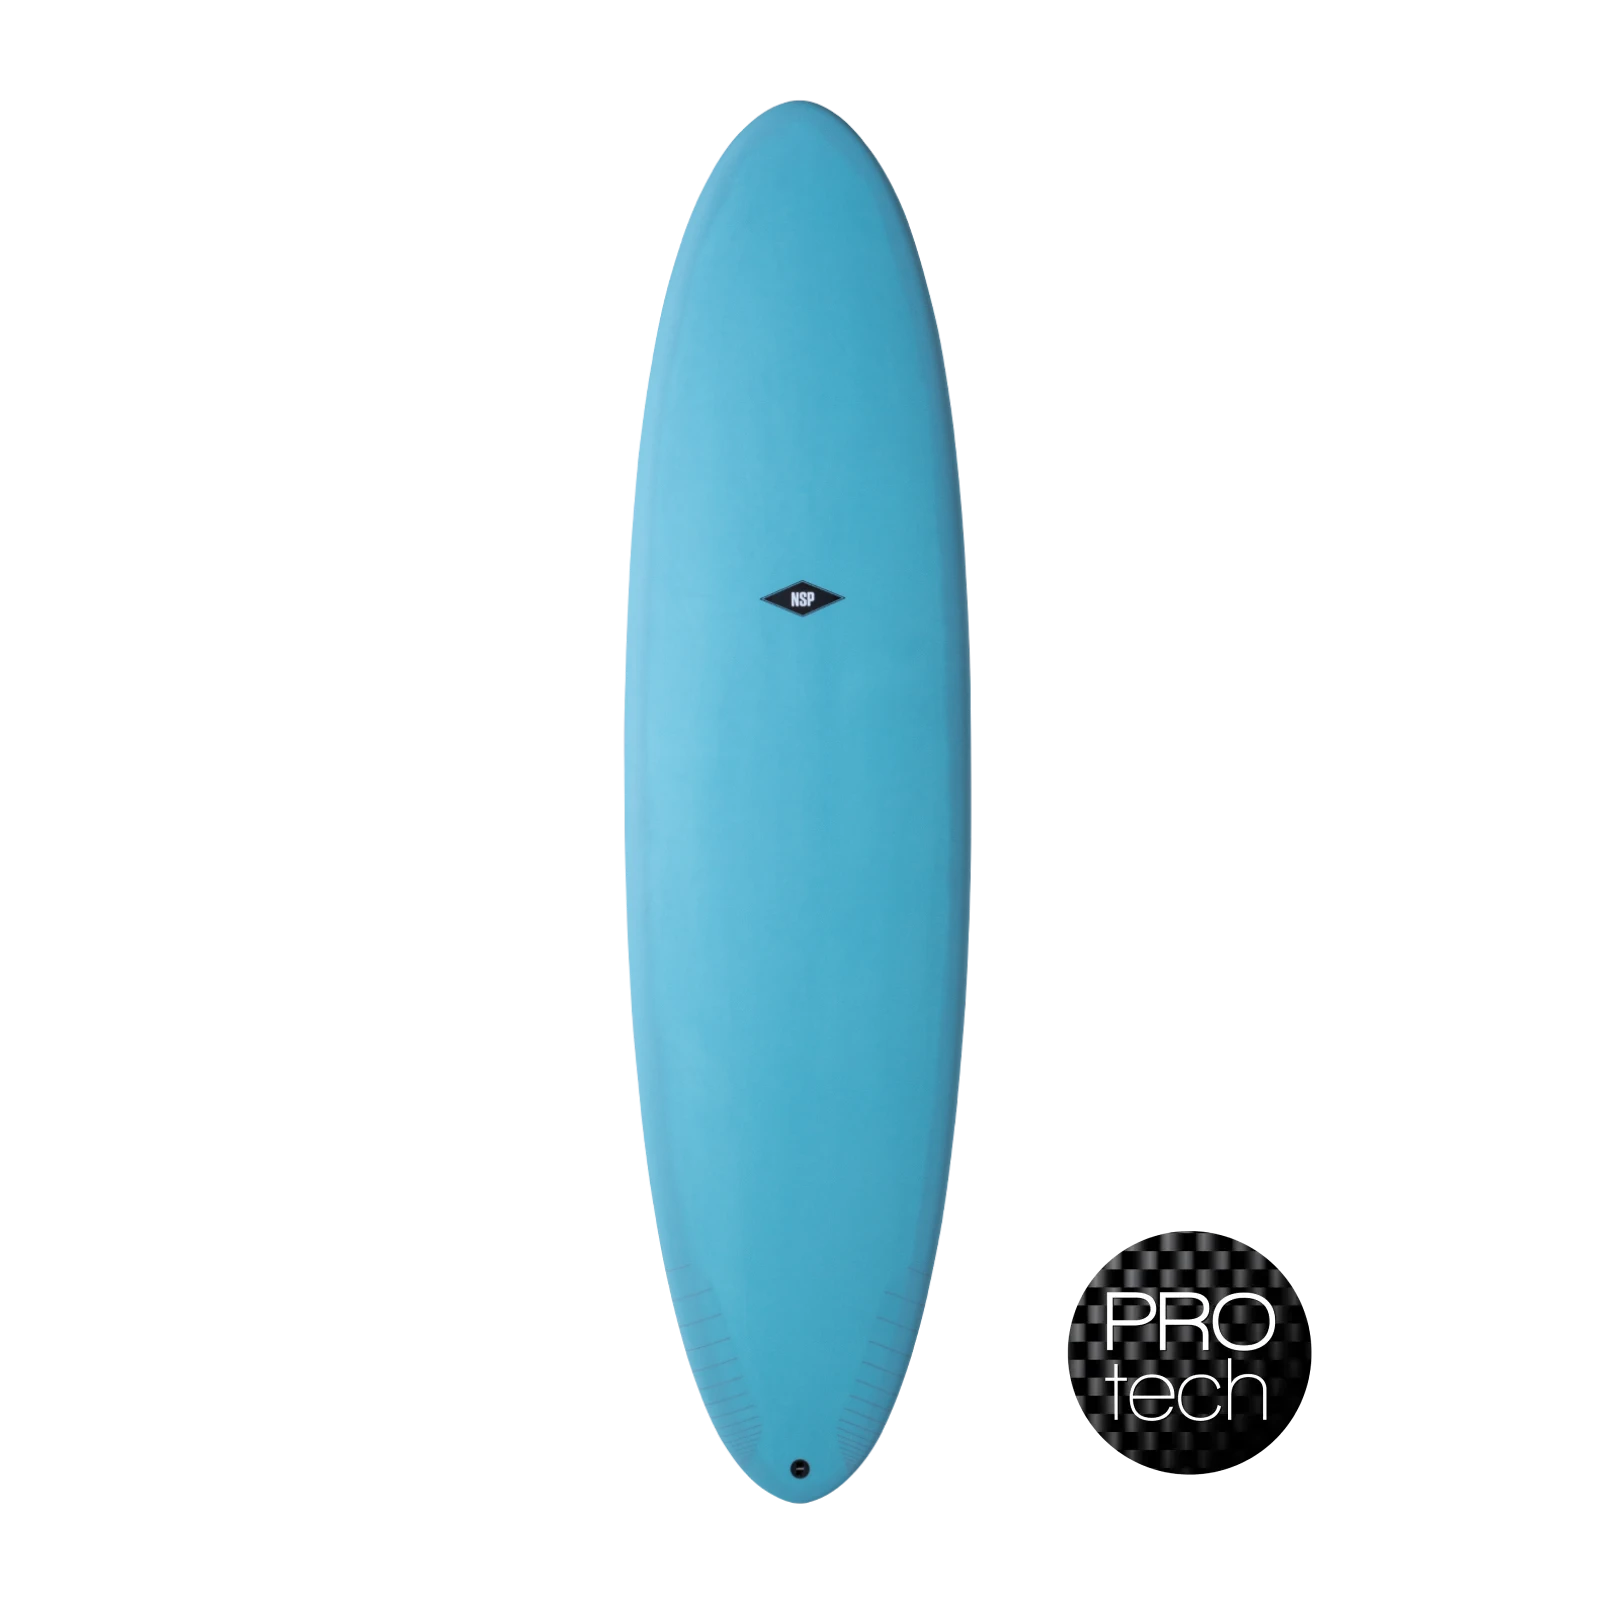 NSP Funboard - Protech Protech 6'8